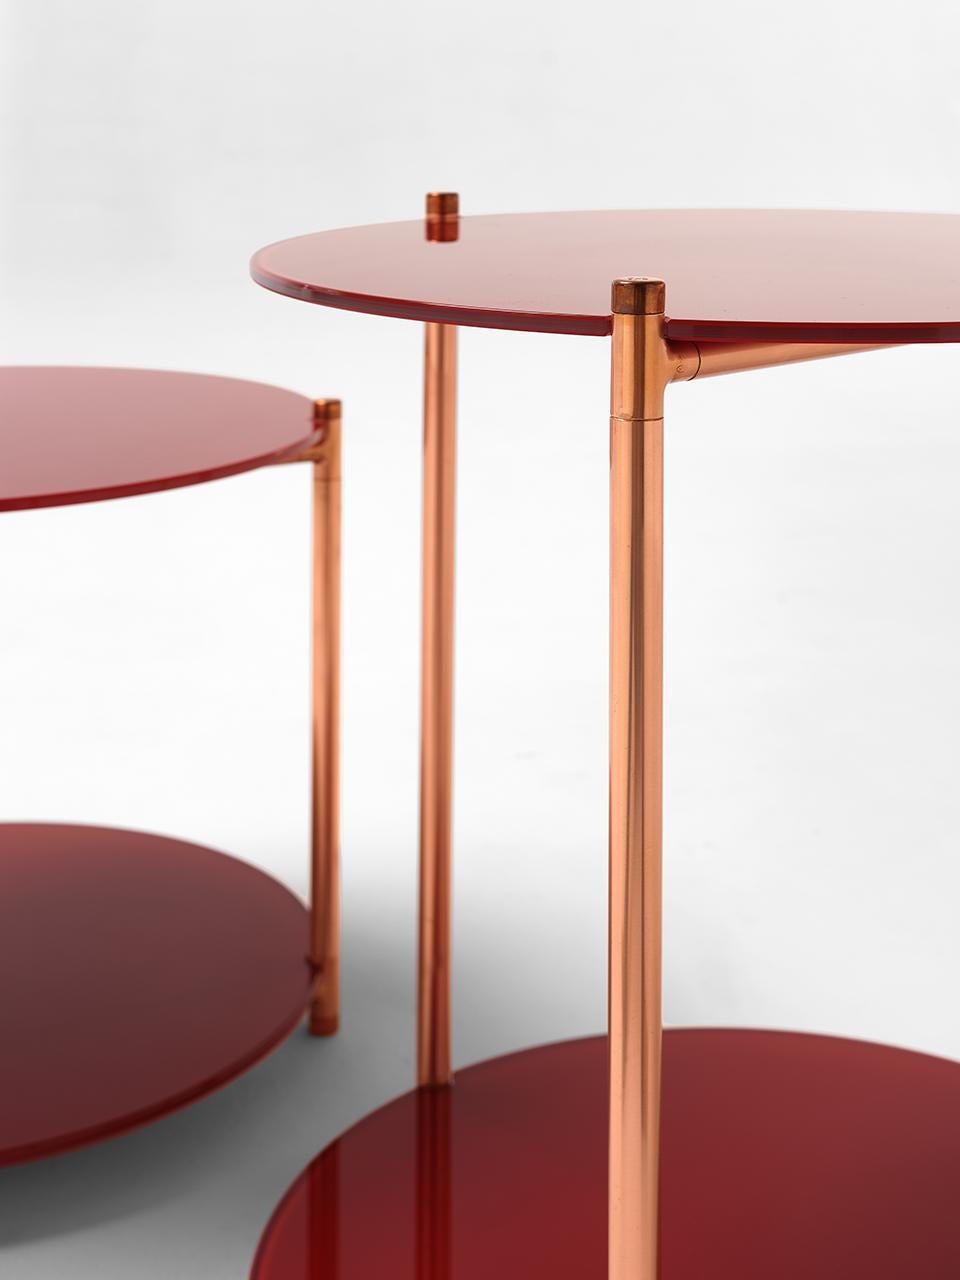 Other 21st Century Modern Side Table With Copper Base And Back-painted Glass Shelves For Sale